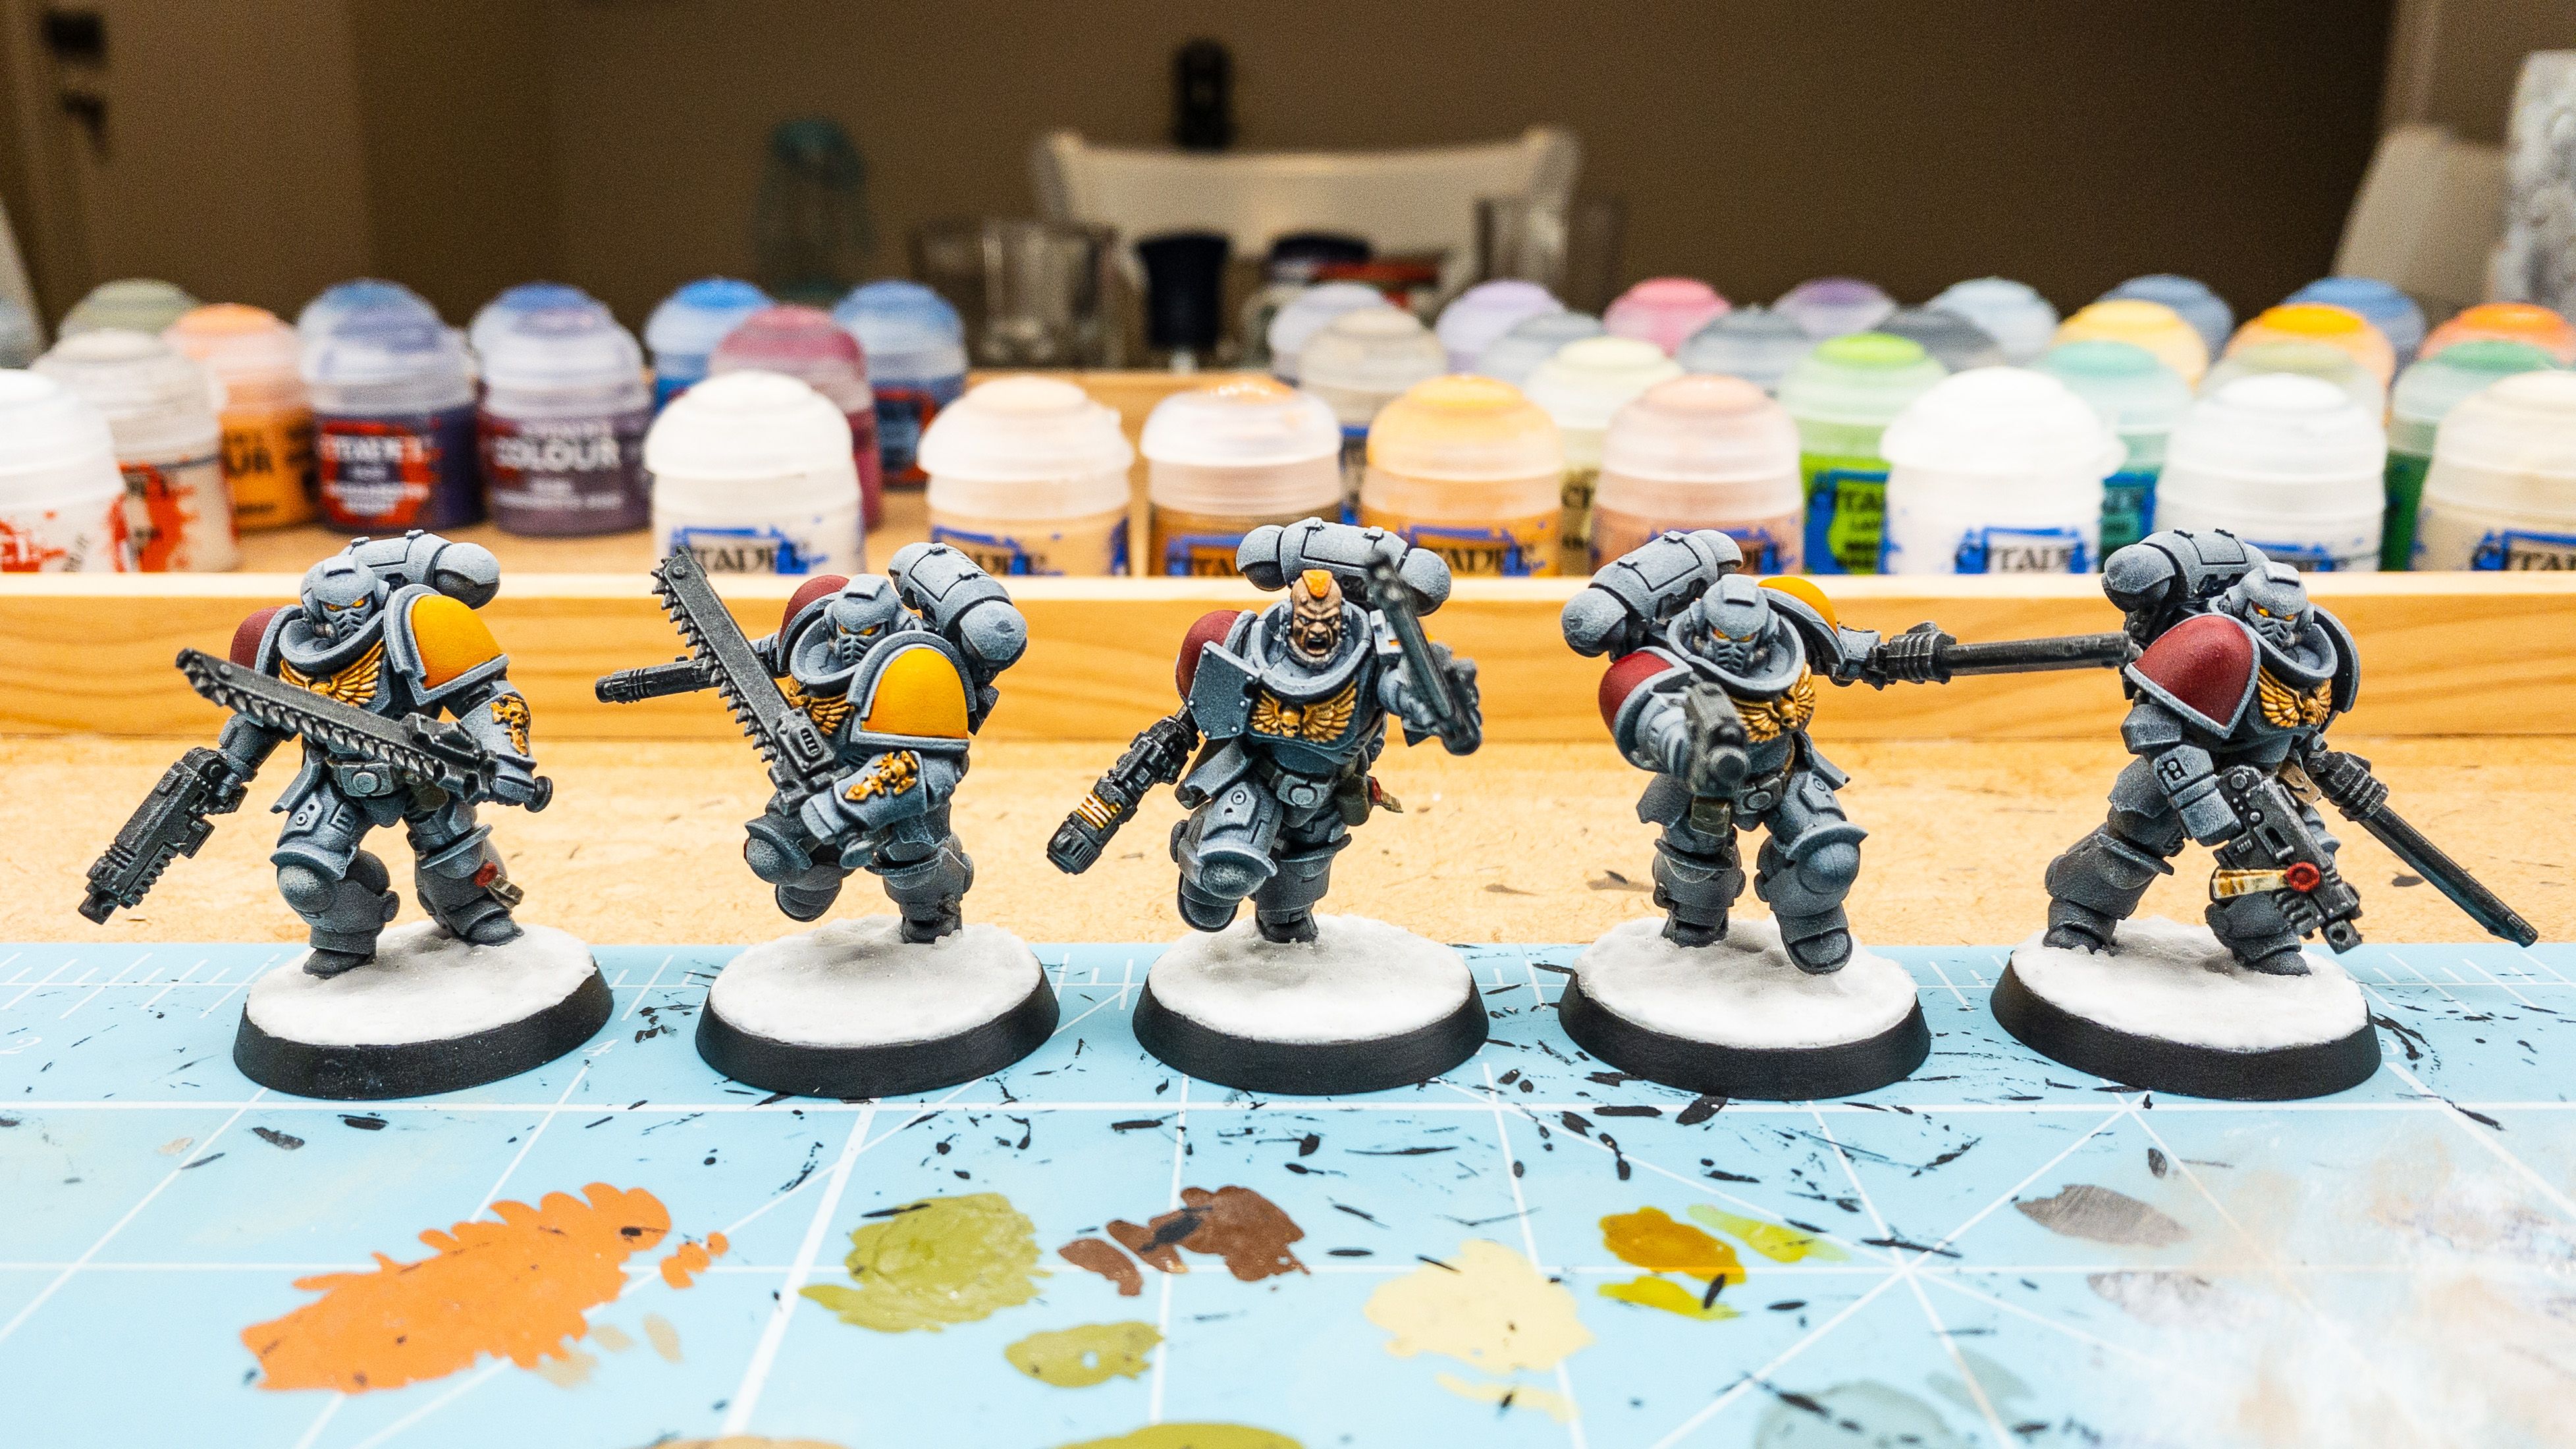 A photo of five Space Marines, all wielding pistols and chainswords. They're painted a blue/grey colour, one shoulder pad is a rich yellow and the other is a dark red. The sergeant in the middle has no helmet on and I was able to paint his pupils, and for the other four with helmets on, their eye slits go from red on the outside to yellow on the inside.